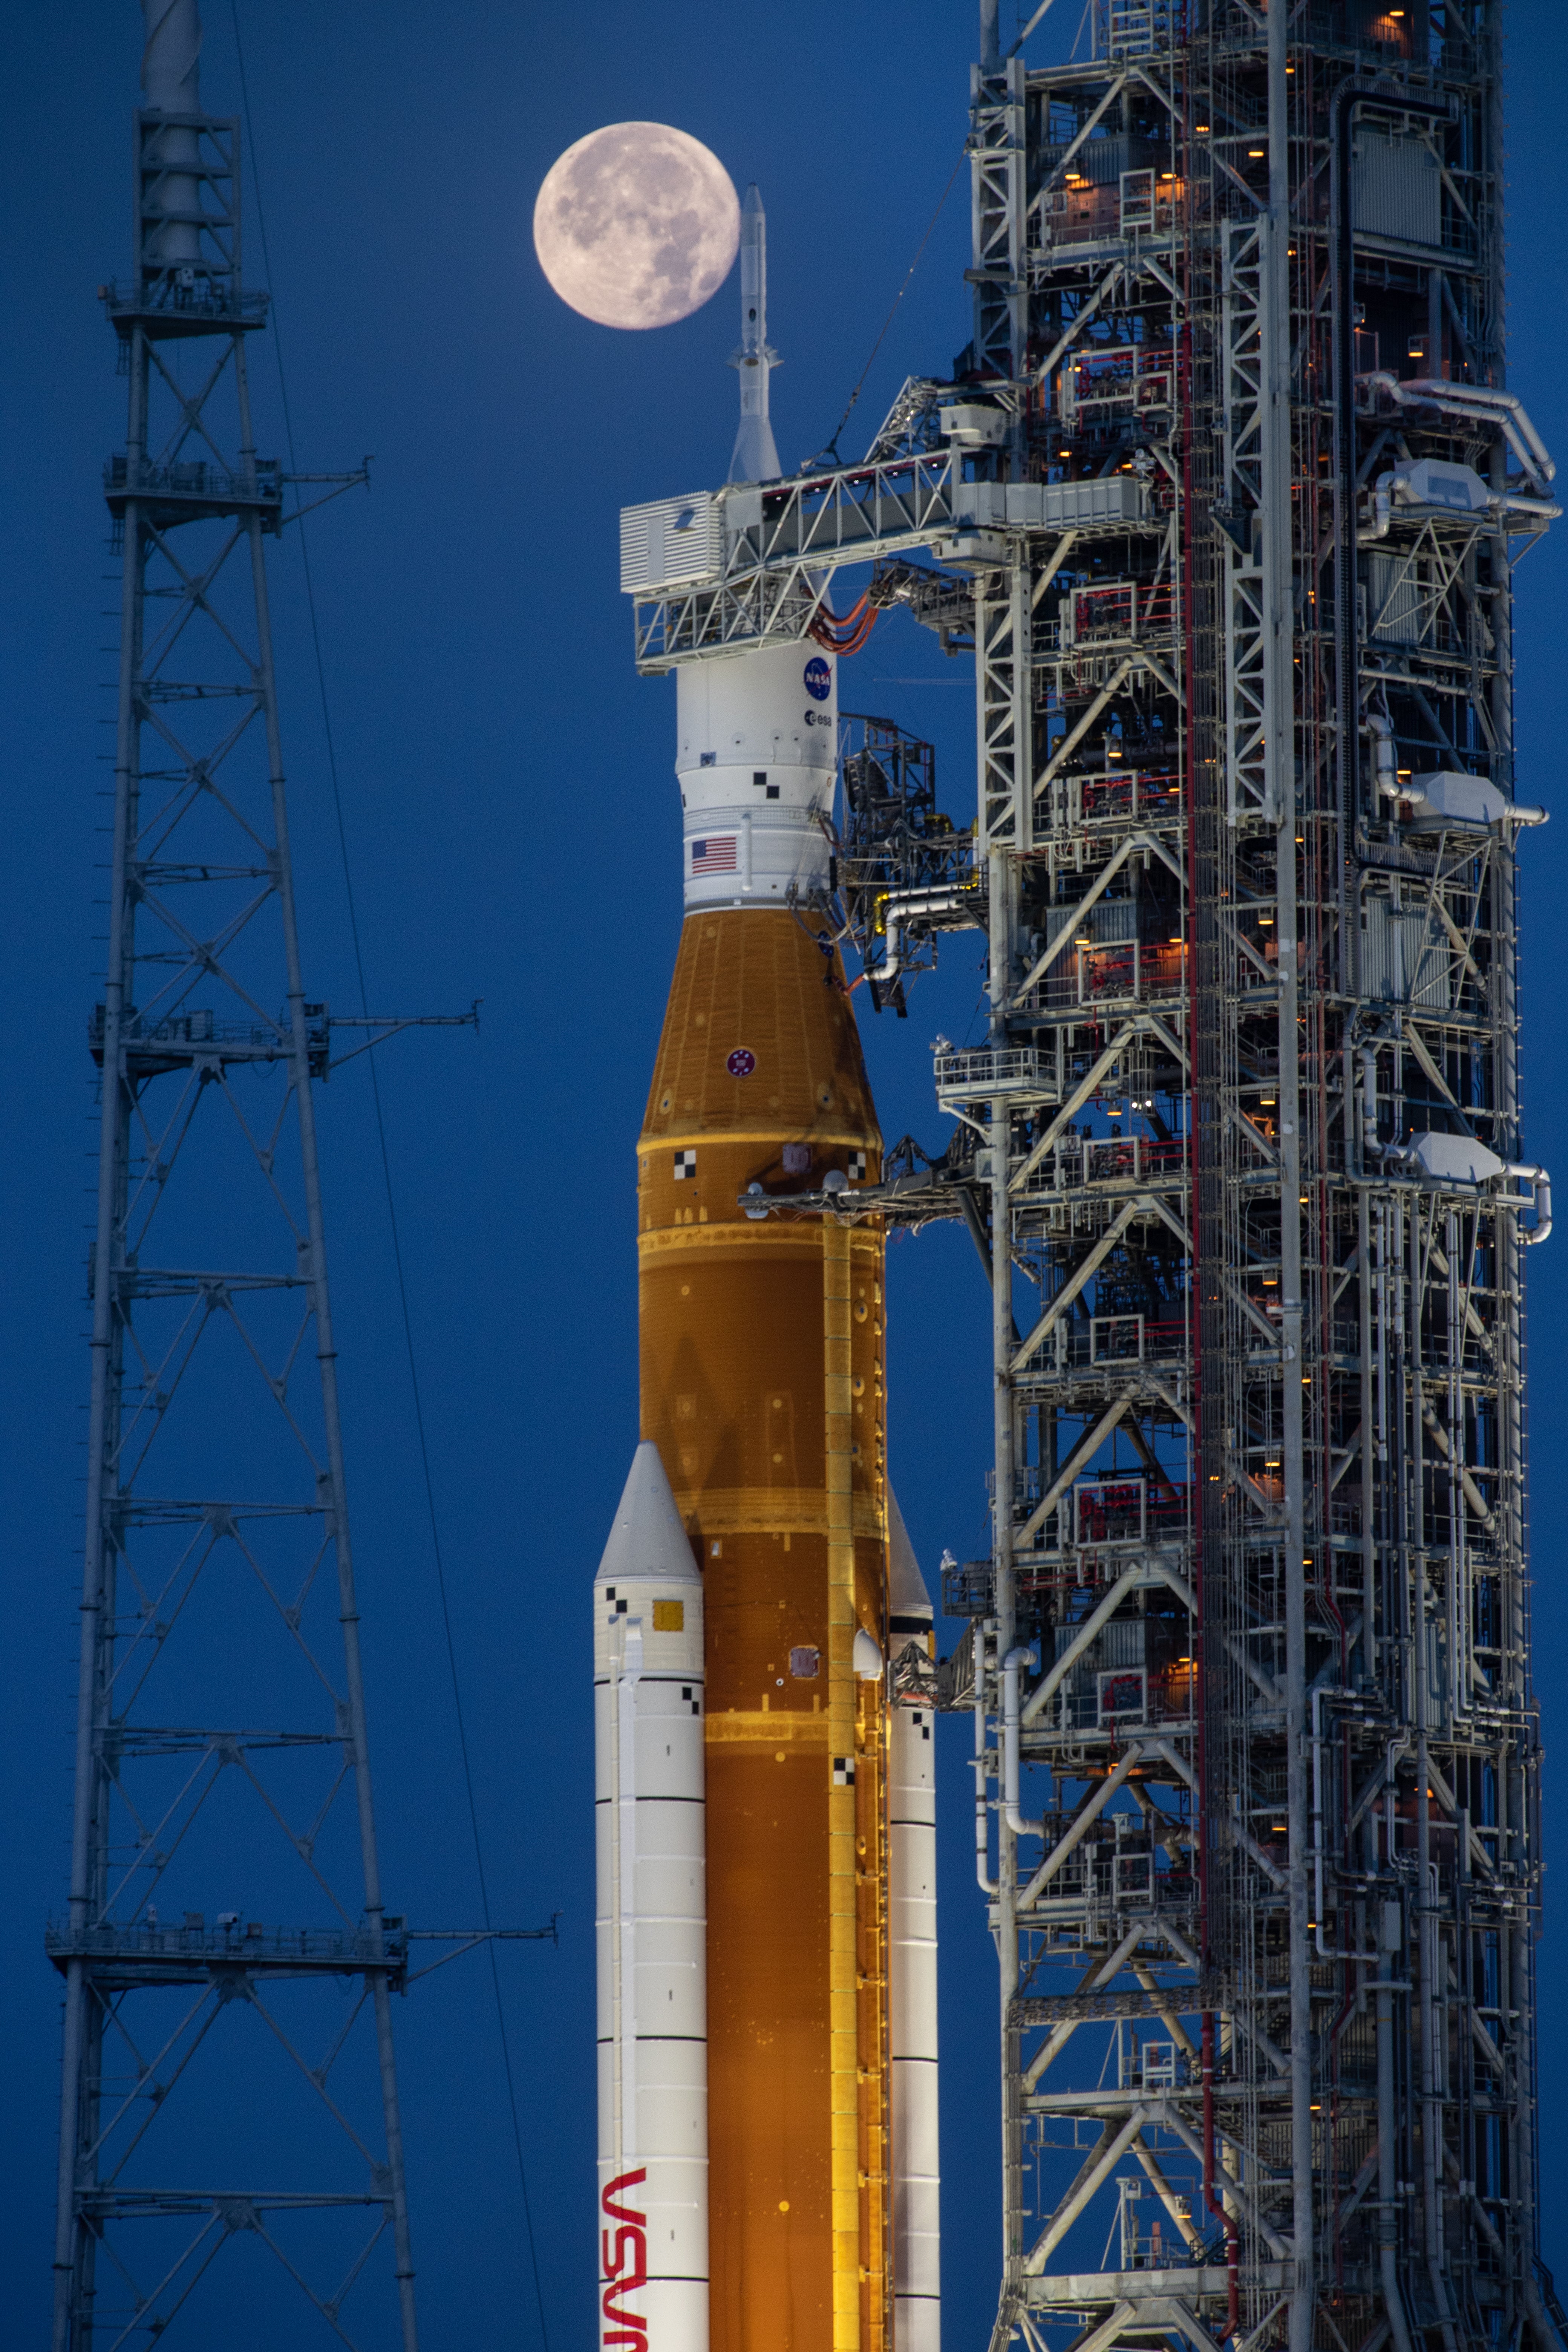 Nasa’s SLS Moon rocket and the Orion spacecraft on the launch pad beneath a full Moon